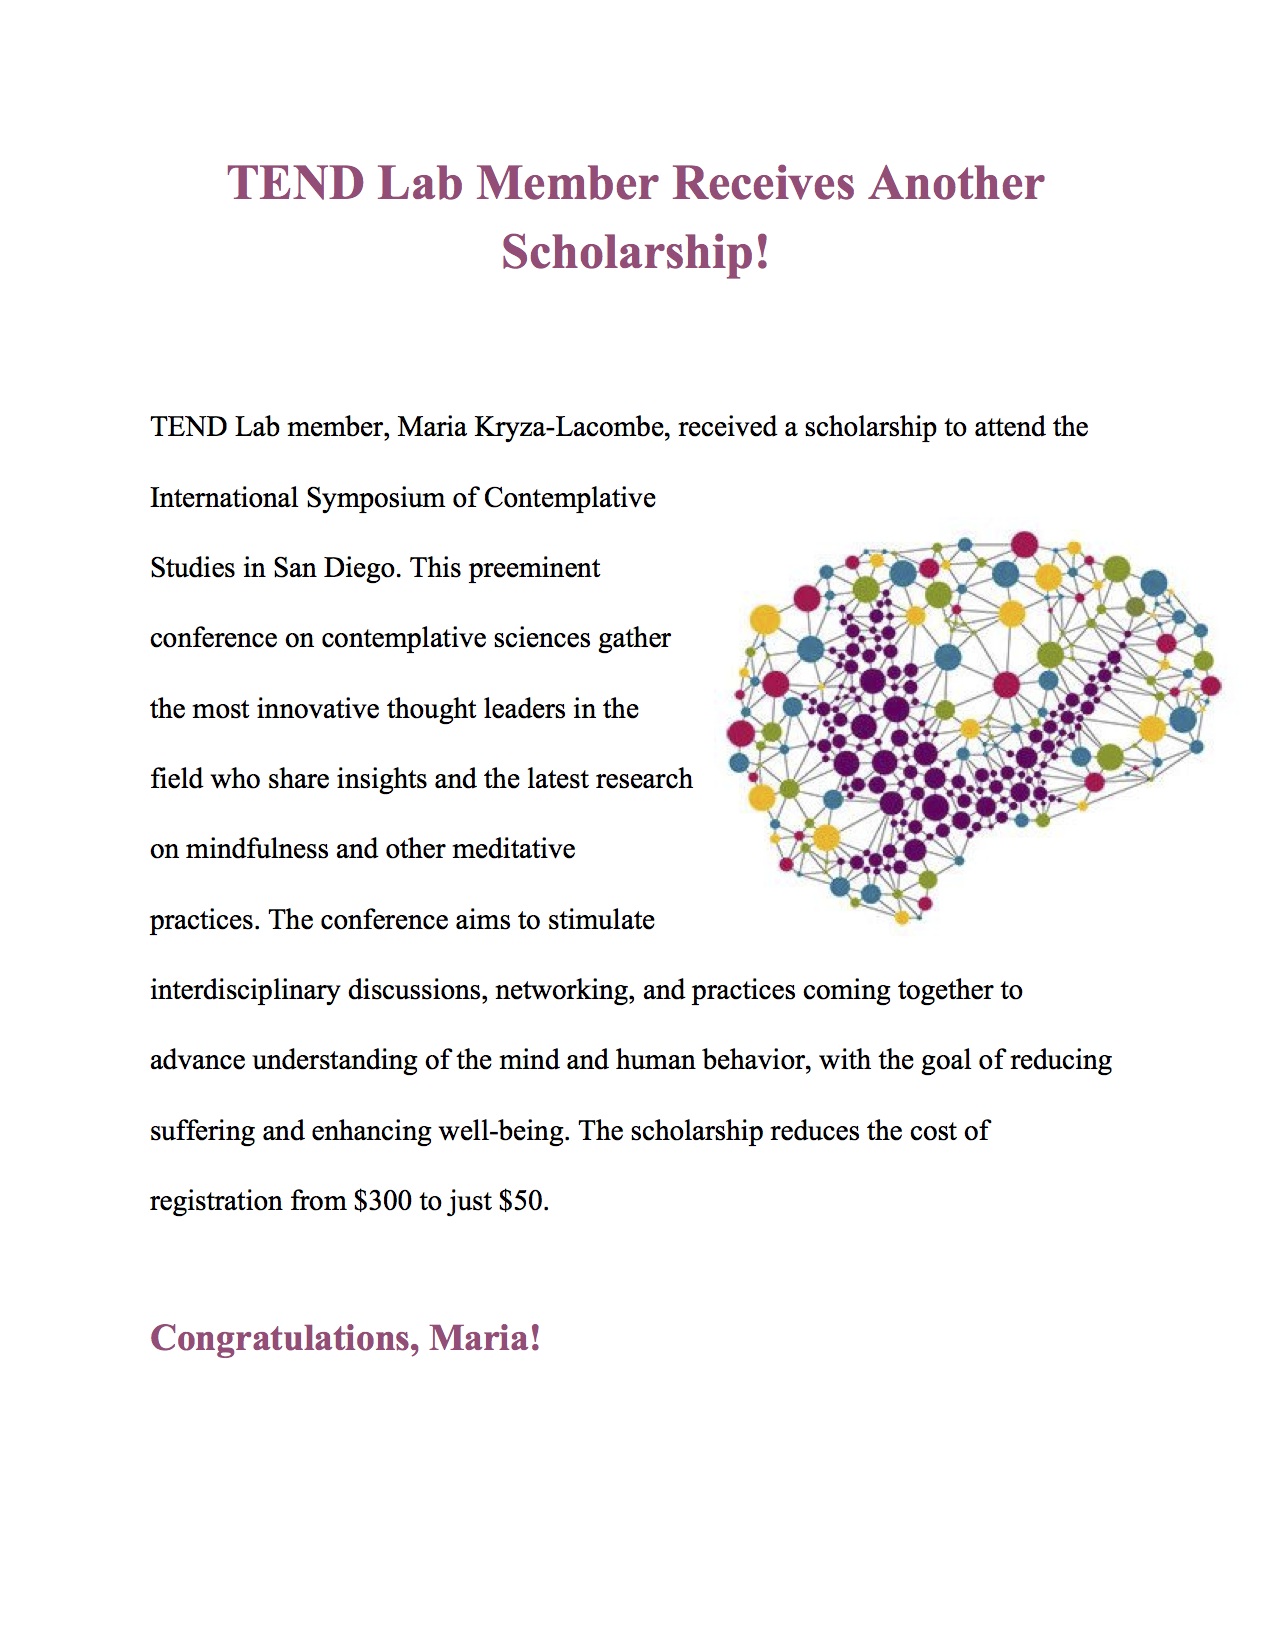 Another scholarship article page 1 titled "TEND Lab Member Receives Another Scholarship"